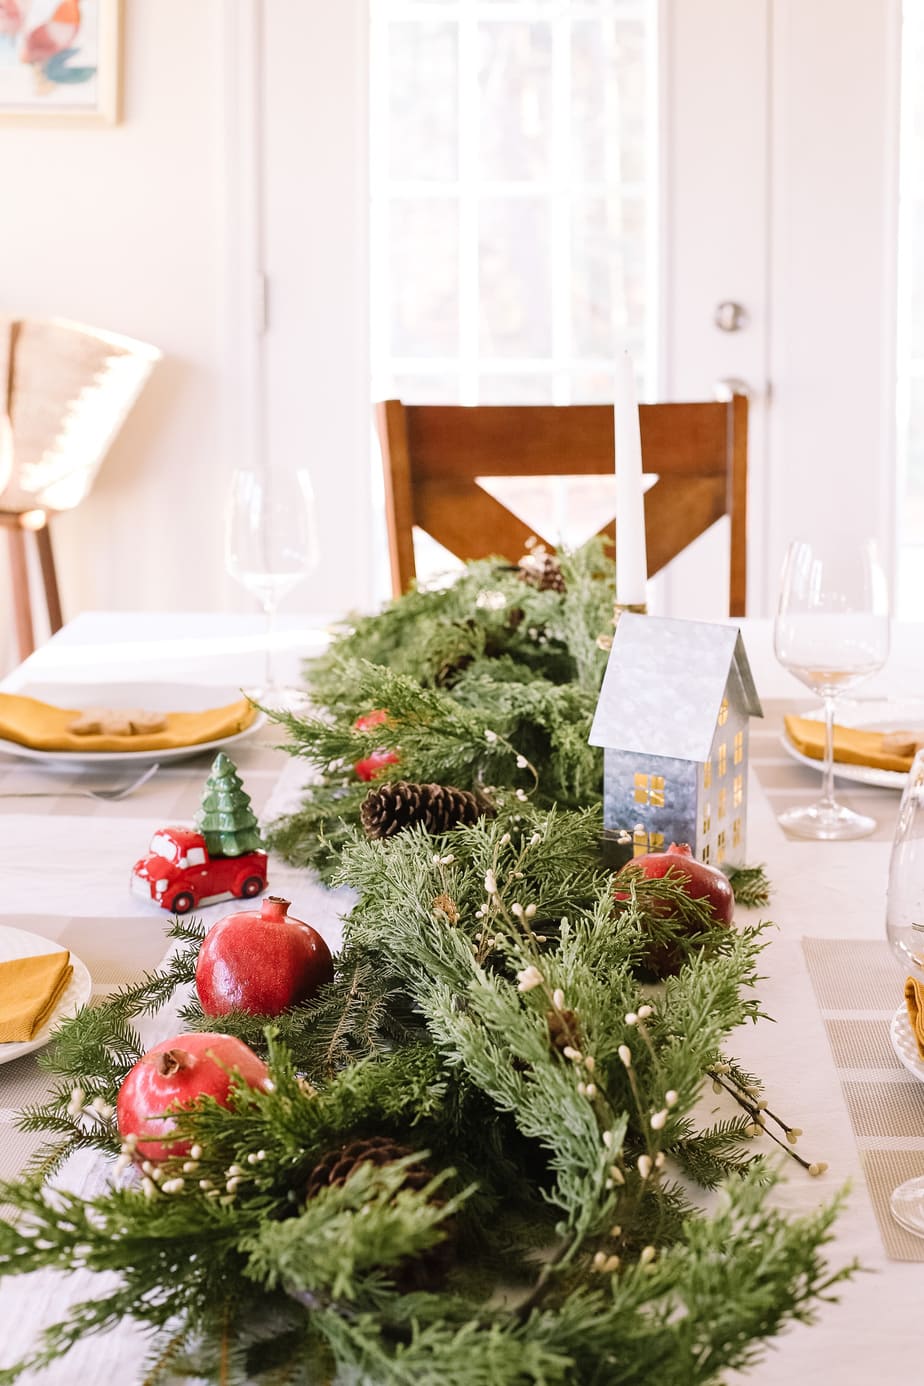 How to Style Christmas Table Decor on a Budget